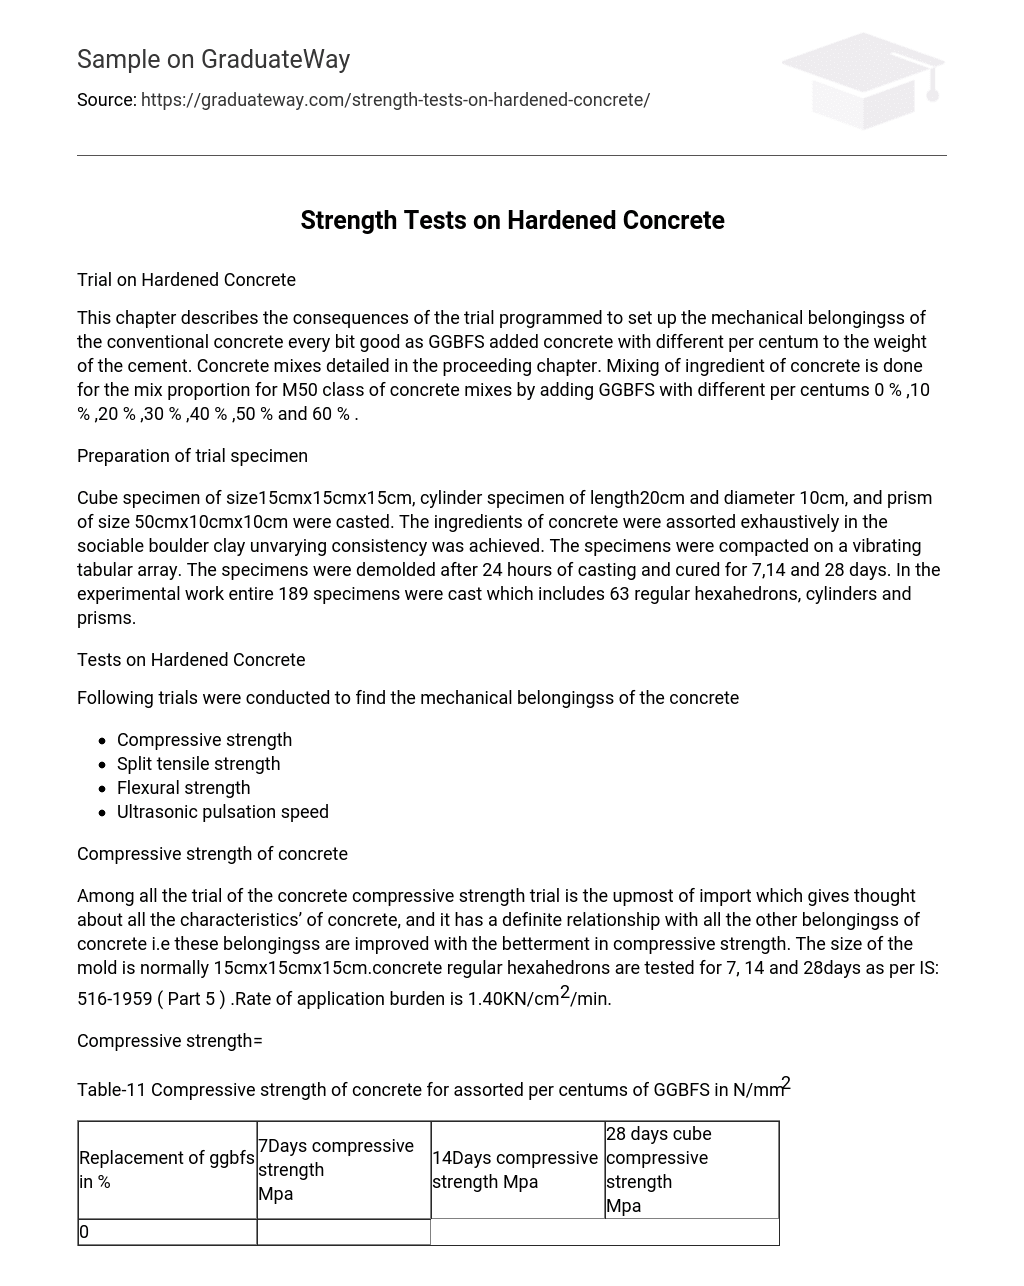 Strength Tests on Hardened Concrete